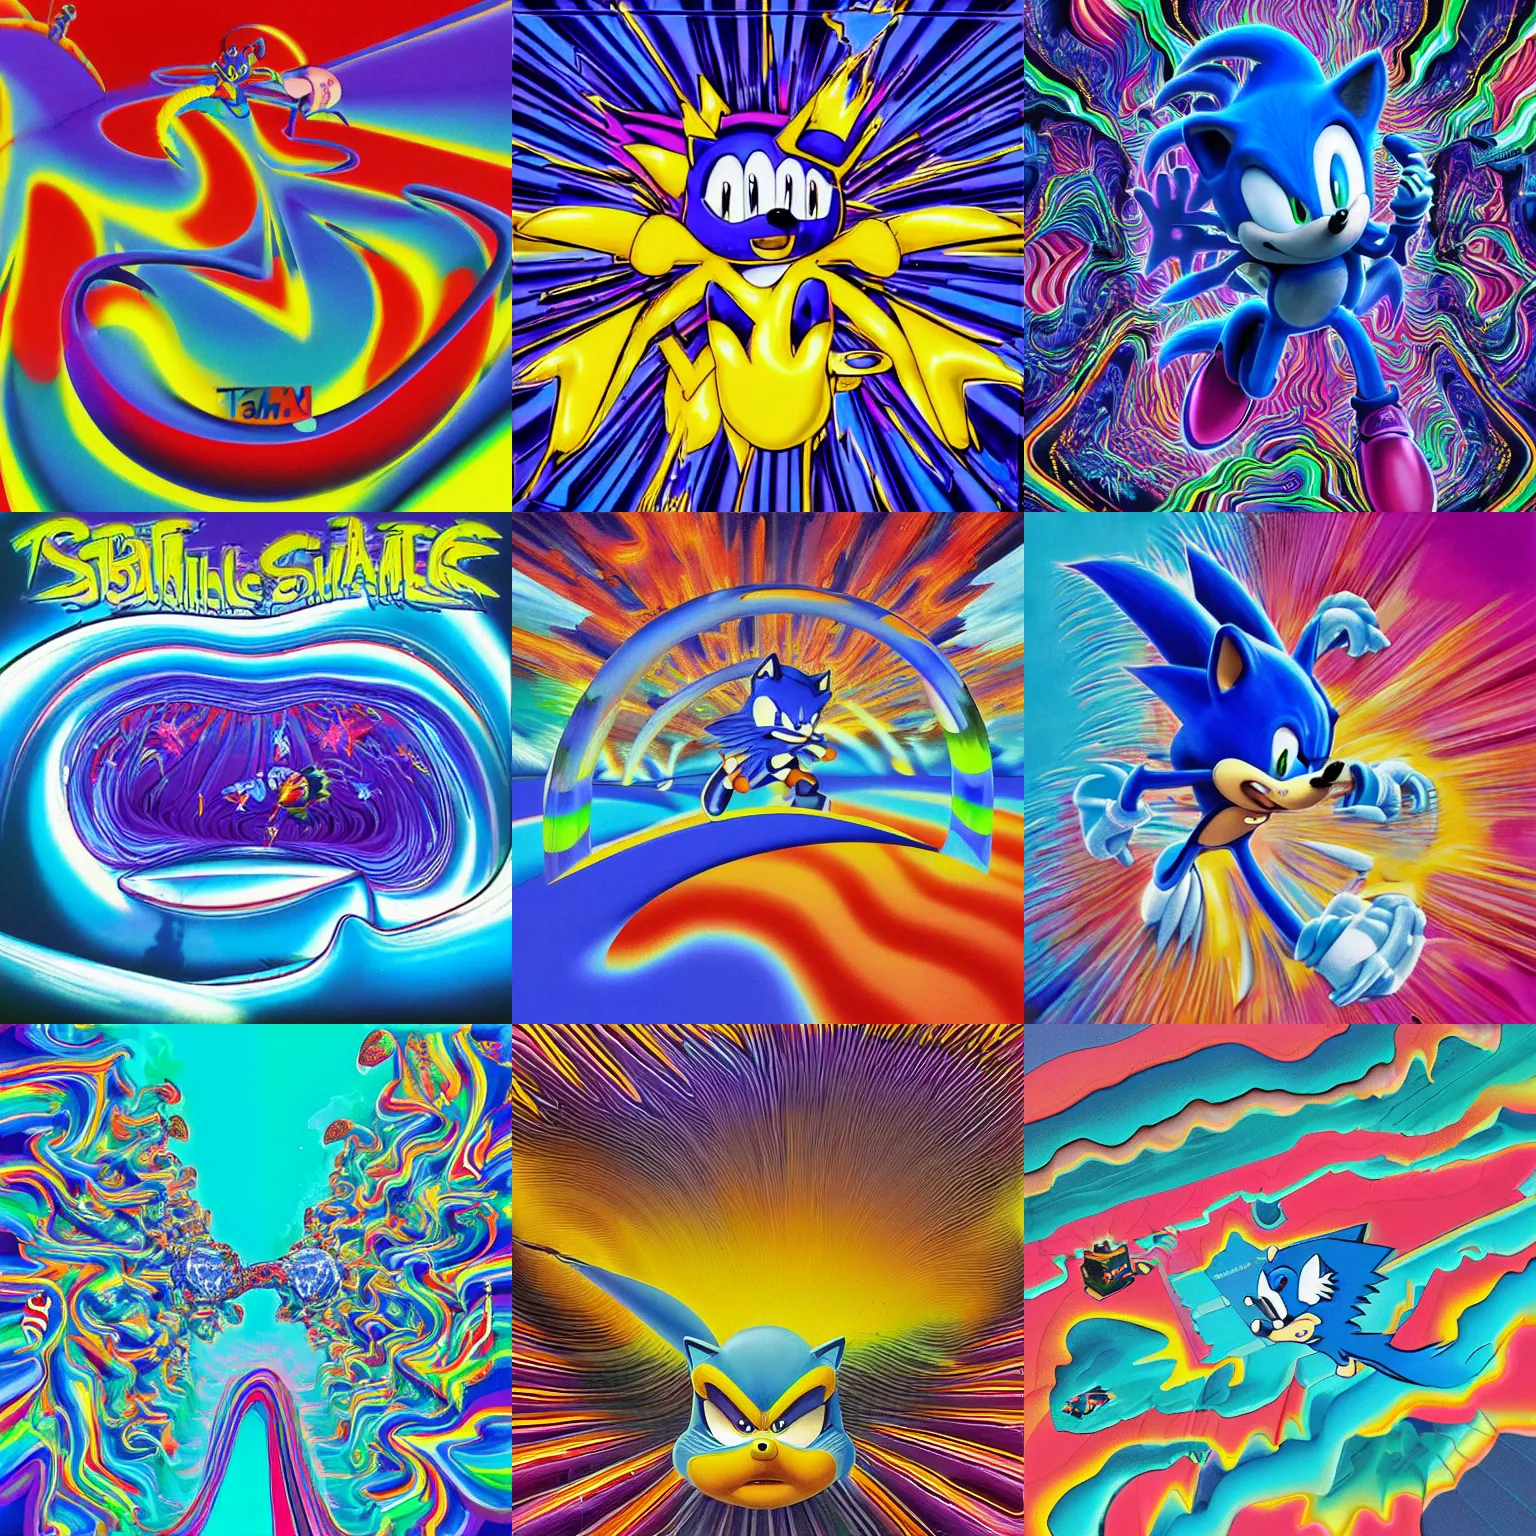 Prompt: surreal, recursive, sharp, detailed professional, high quality airbrush art sonic the hedgehog MGMT tame impala album cover of a liquid dissolving LSD DMT blue sonic the hedgehog surfing through cyberspace, purple checkerboard background, 1990s 1992 Sega Genesis video game album cover